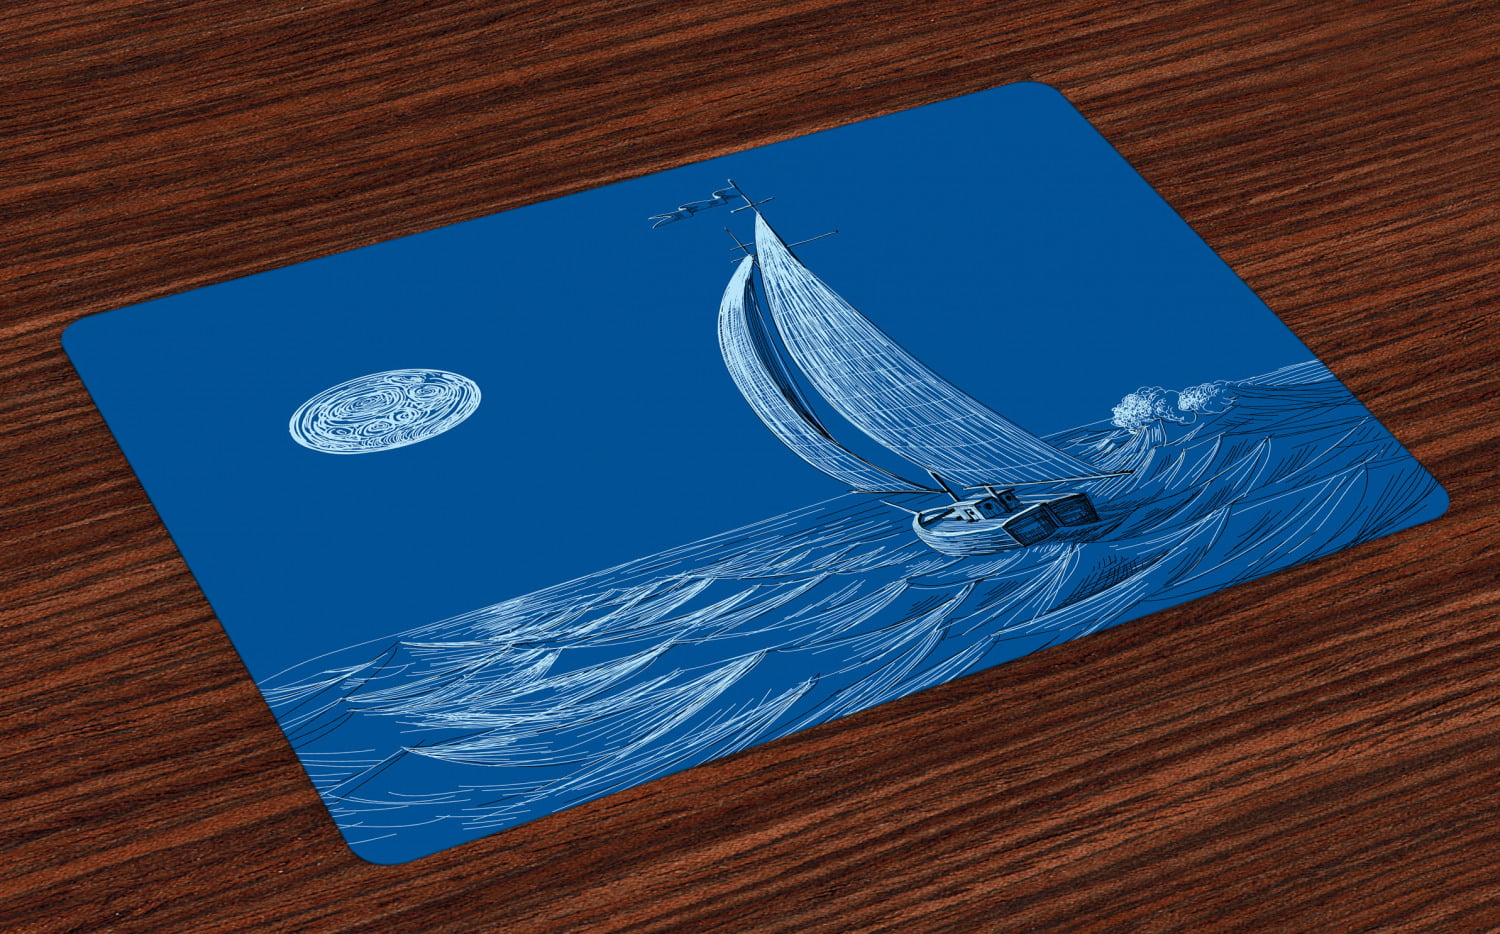 Leather Placemats and Coasters Set of 2 Sailing Fishing Heat Resistant Non-Slip Table​Mats Waterproof Stain Resistant Dinner Placemats for Kitchen Dining Table